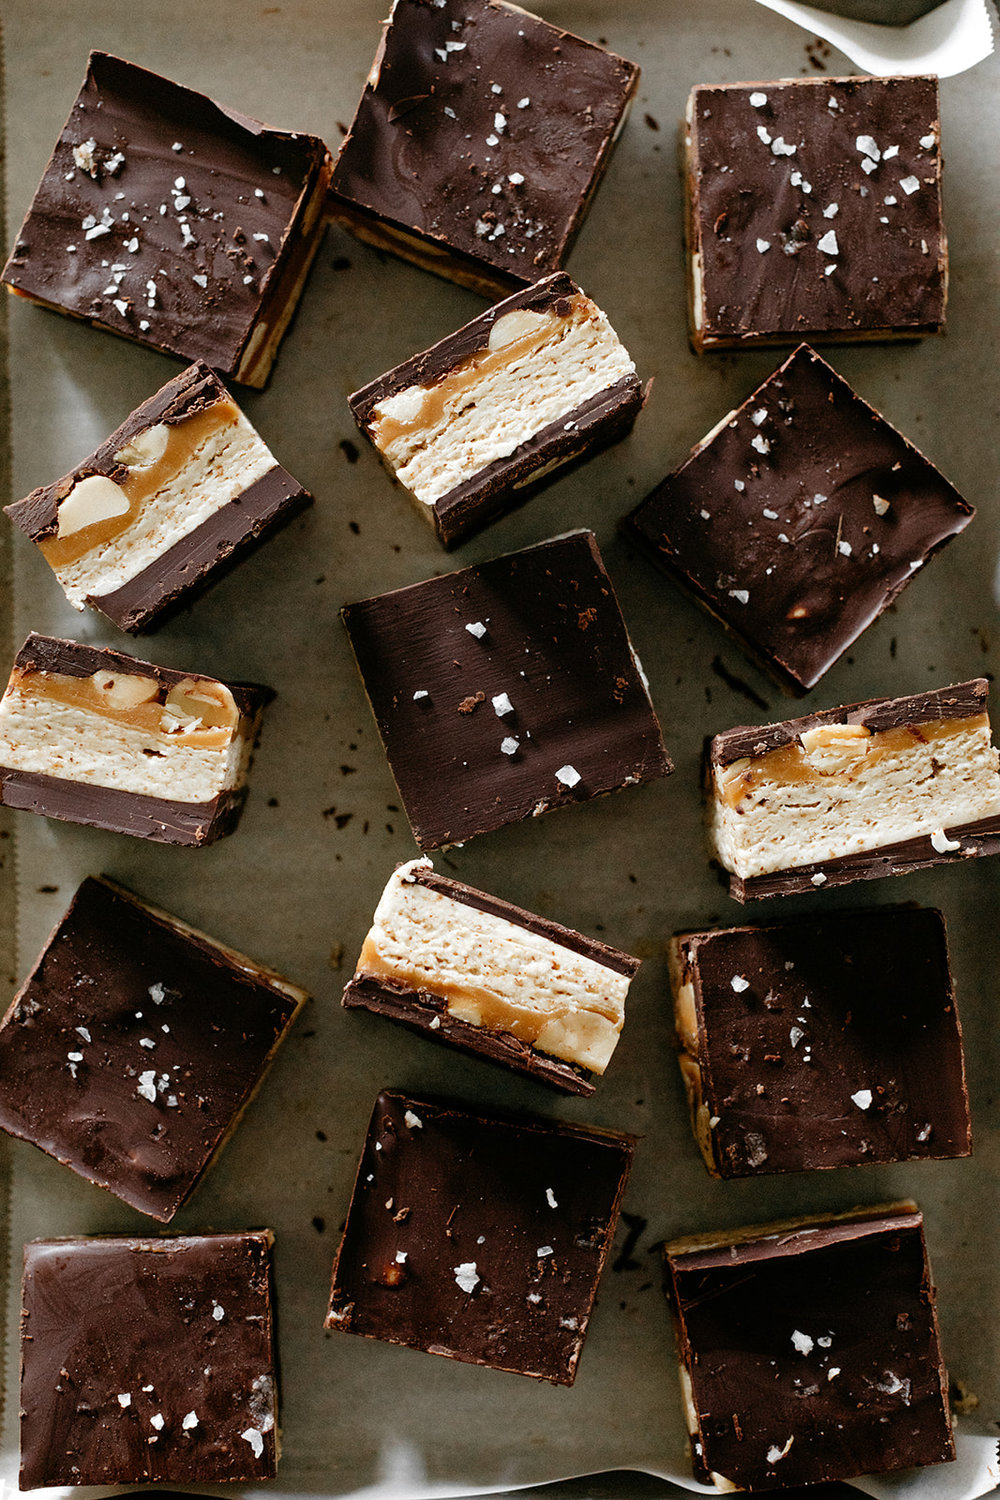 7-19-19-molly-yeh-homemade-snickers-8.jpg